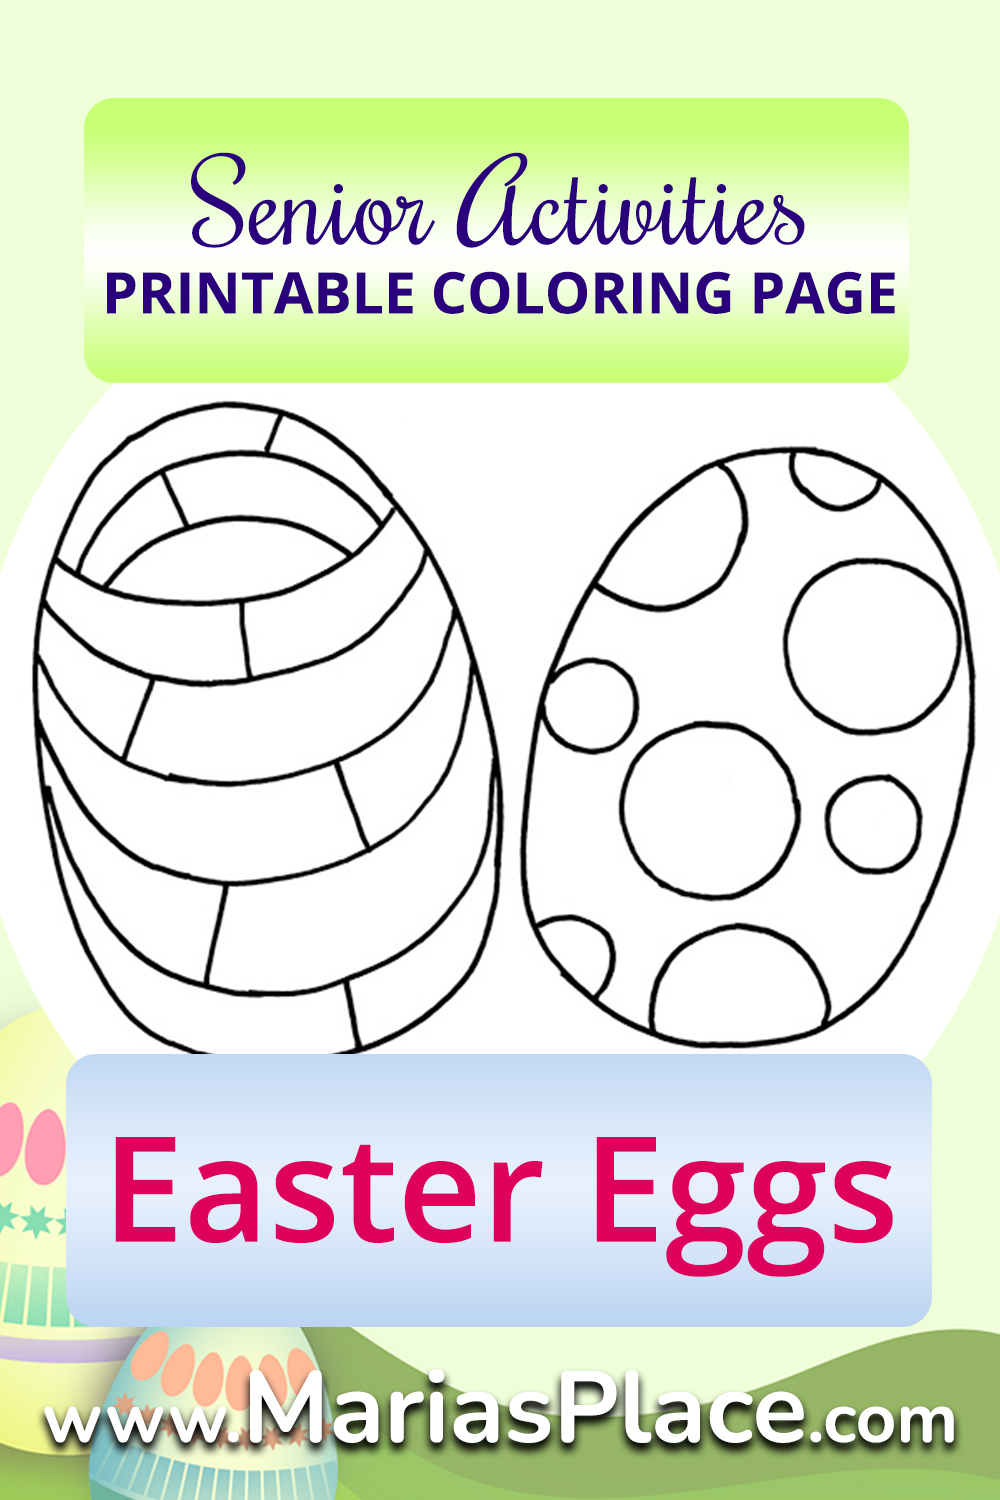 Easter Eggs, Coloring